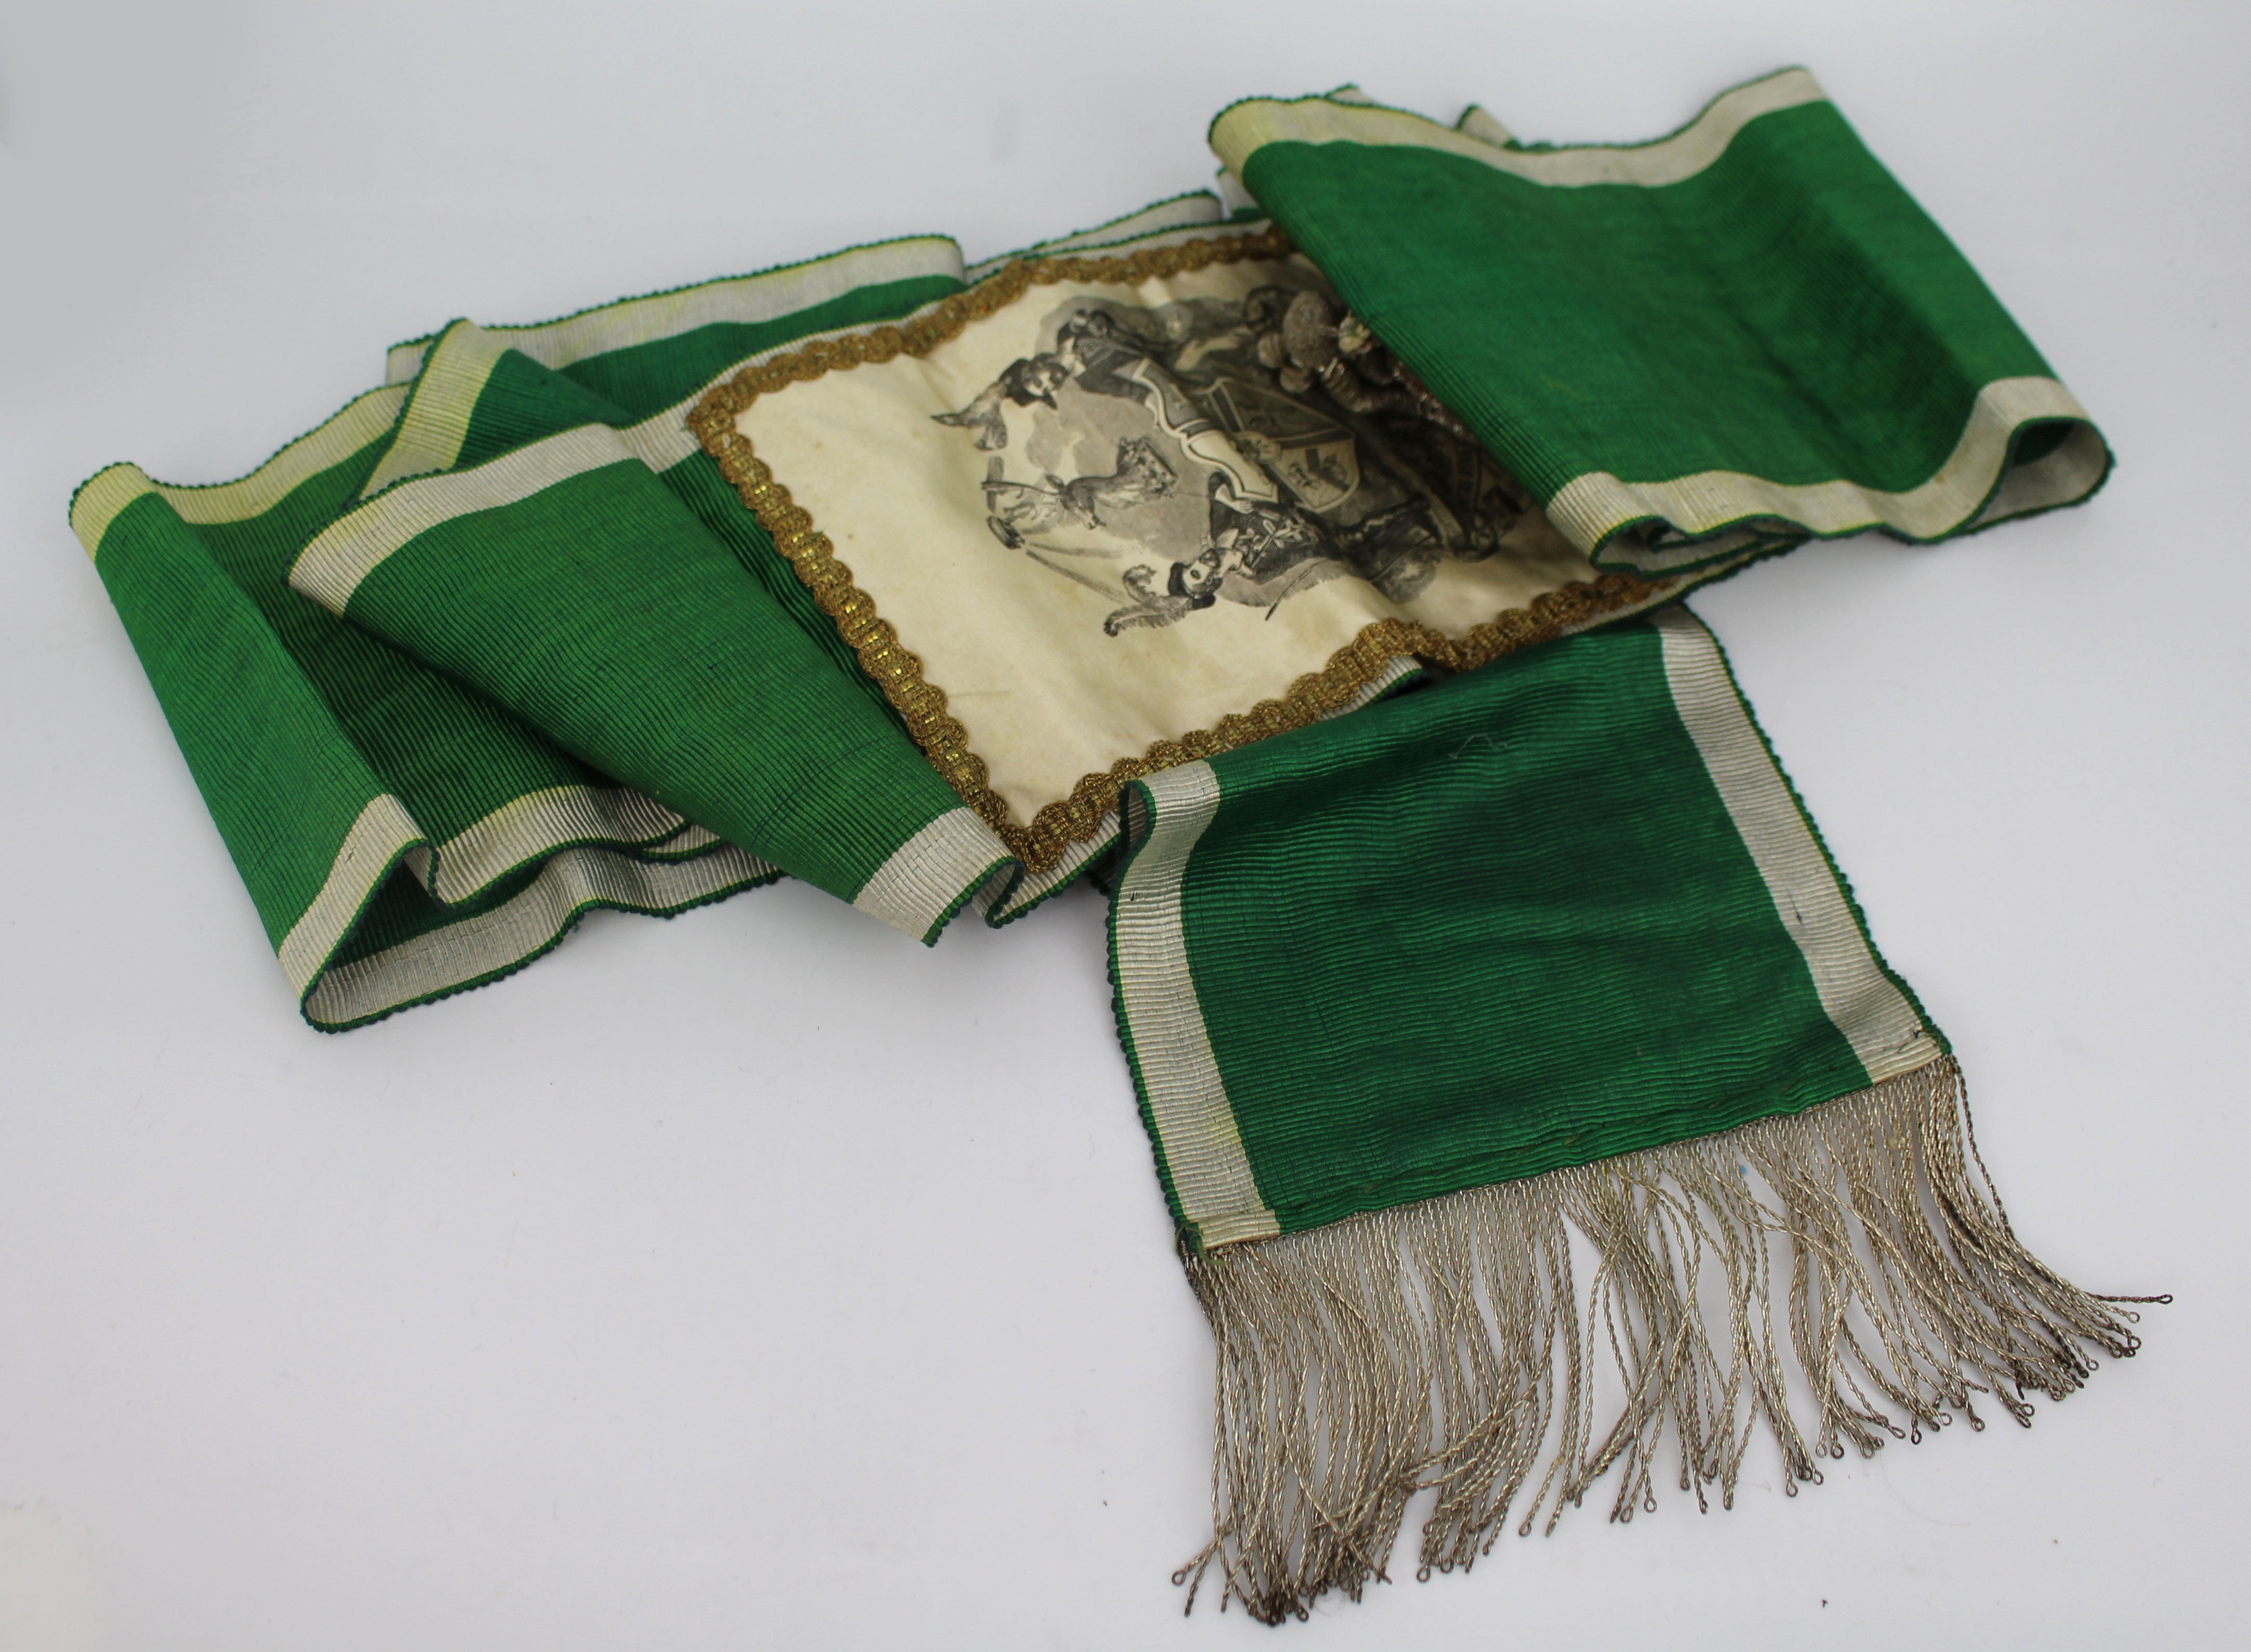 Antique Masonic Foresters Friendly Society Green Sash - Image 2 of 2